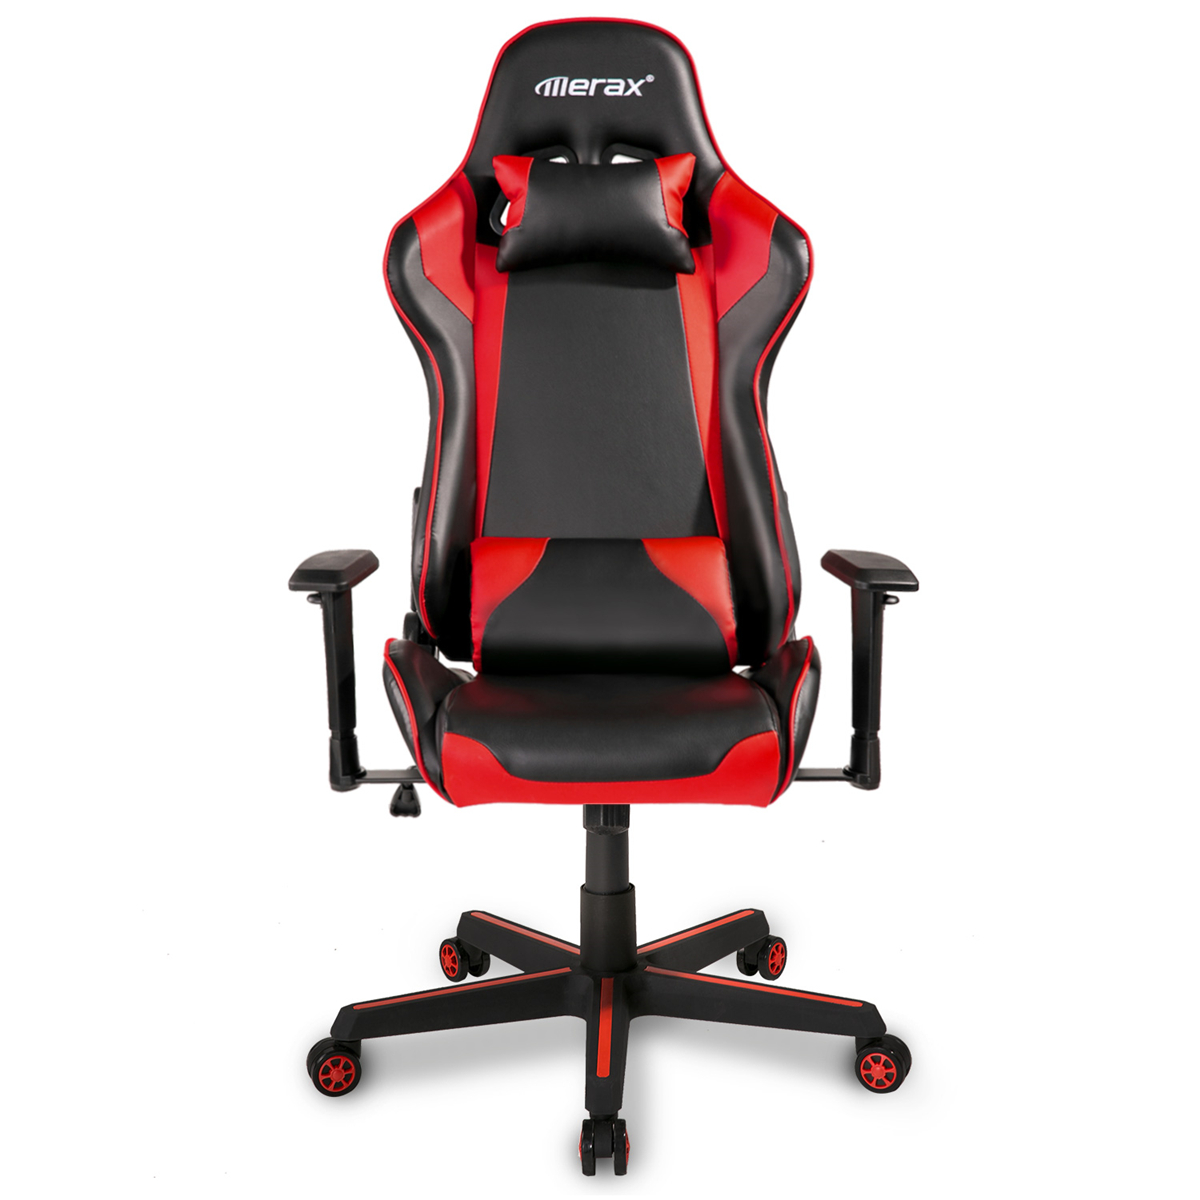 

Merax Ergonomic Office Chair Gaming Chair Racing Style High Back PU Leather Folding Chair Swivel Chair with Headrest and Lumbar Support